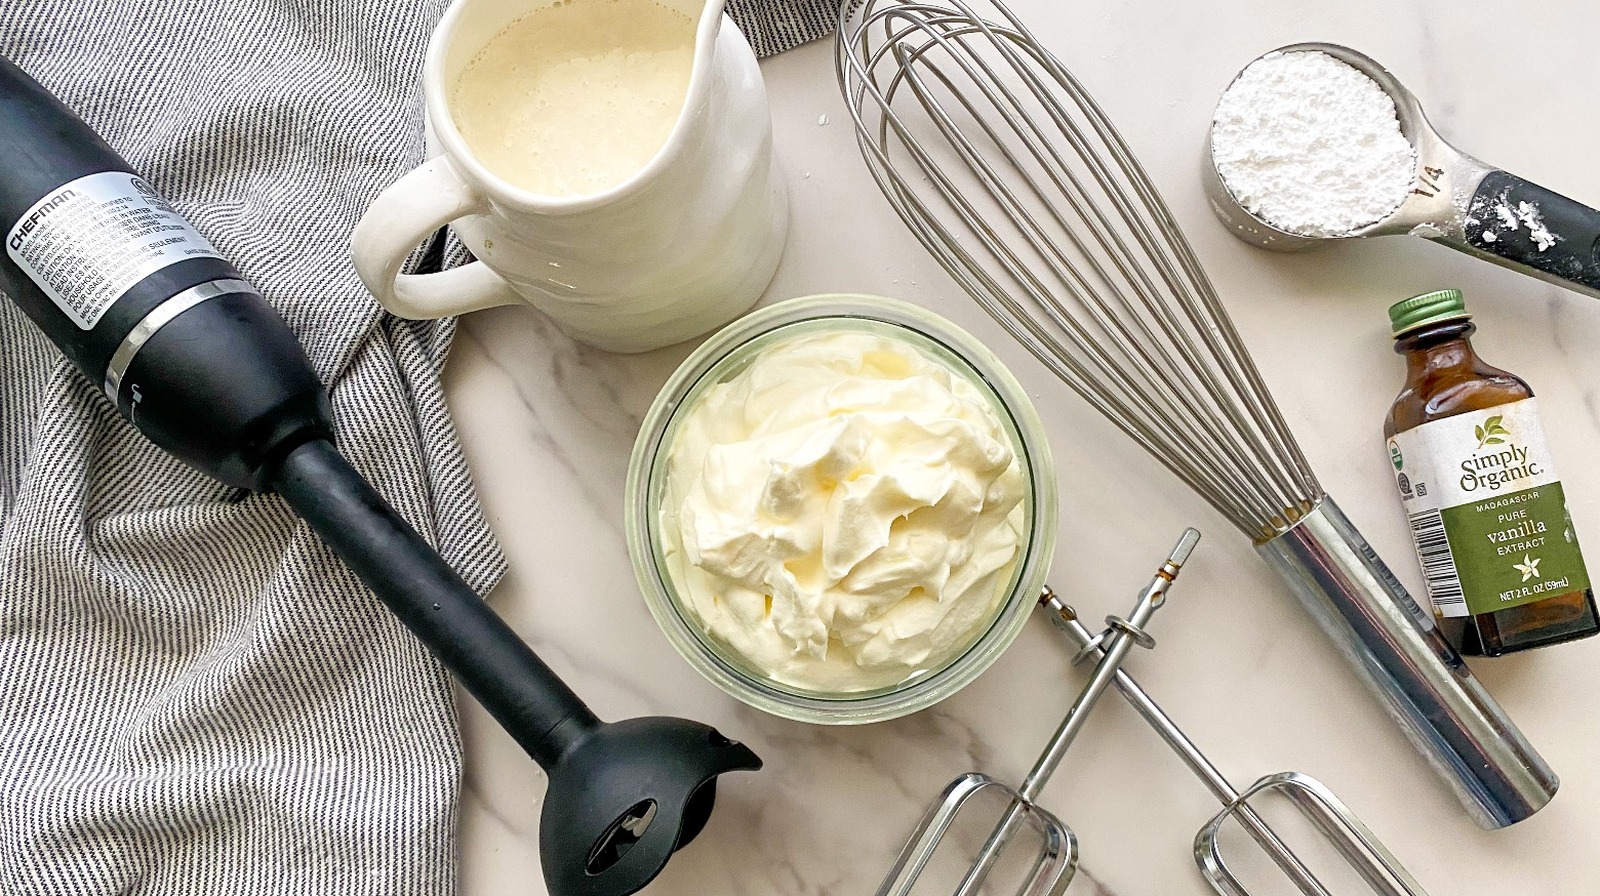 How to Make Whipped Cream with a Stand Mixer